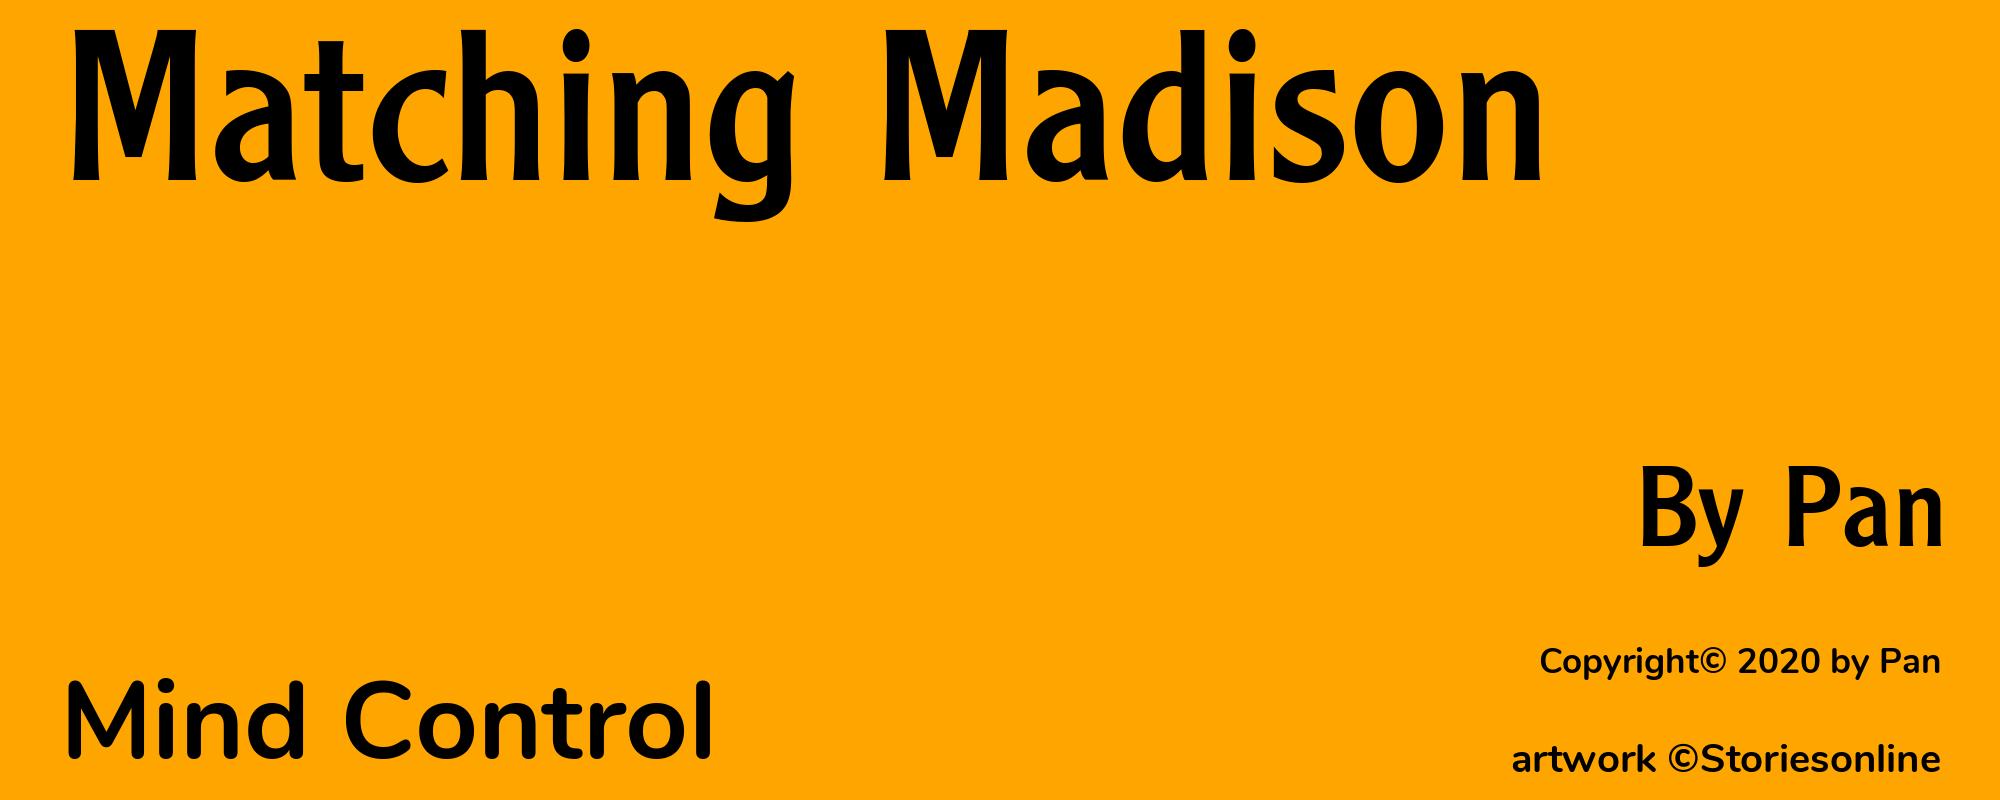 Matching Madison - Cover